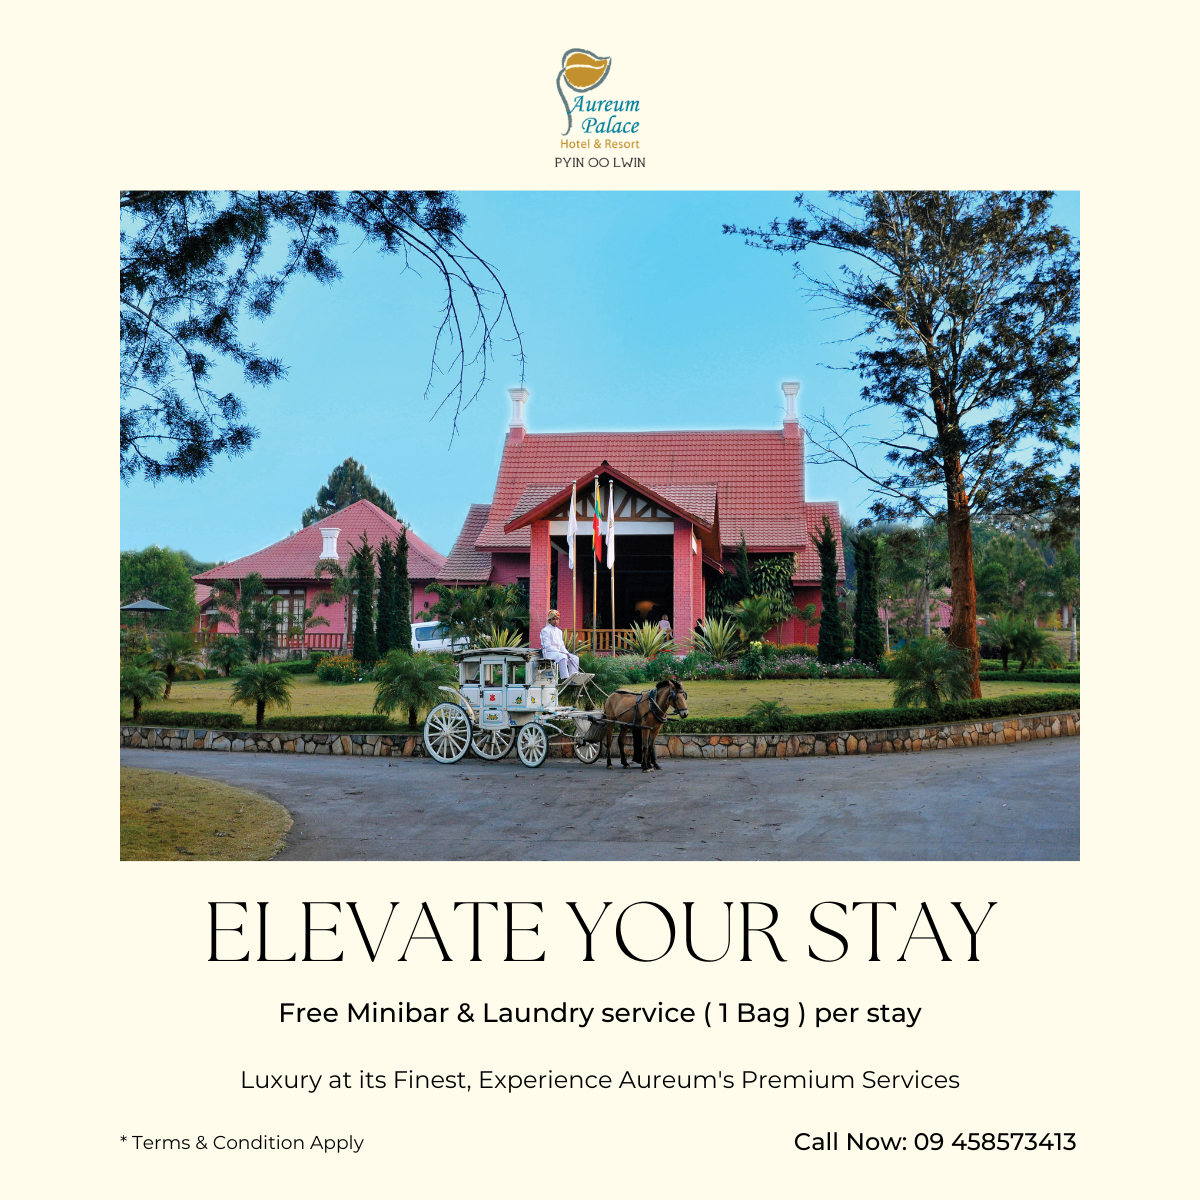 ELEVATE YOUR STAY